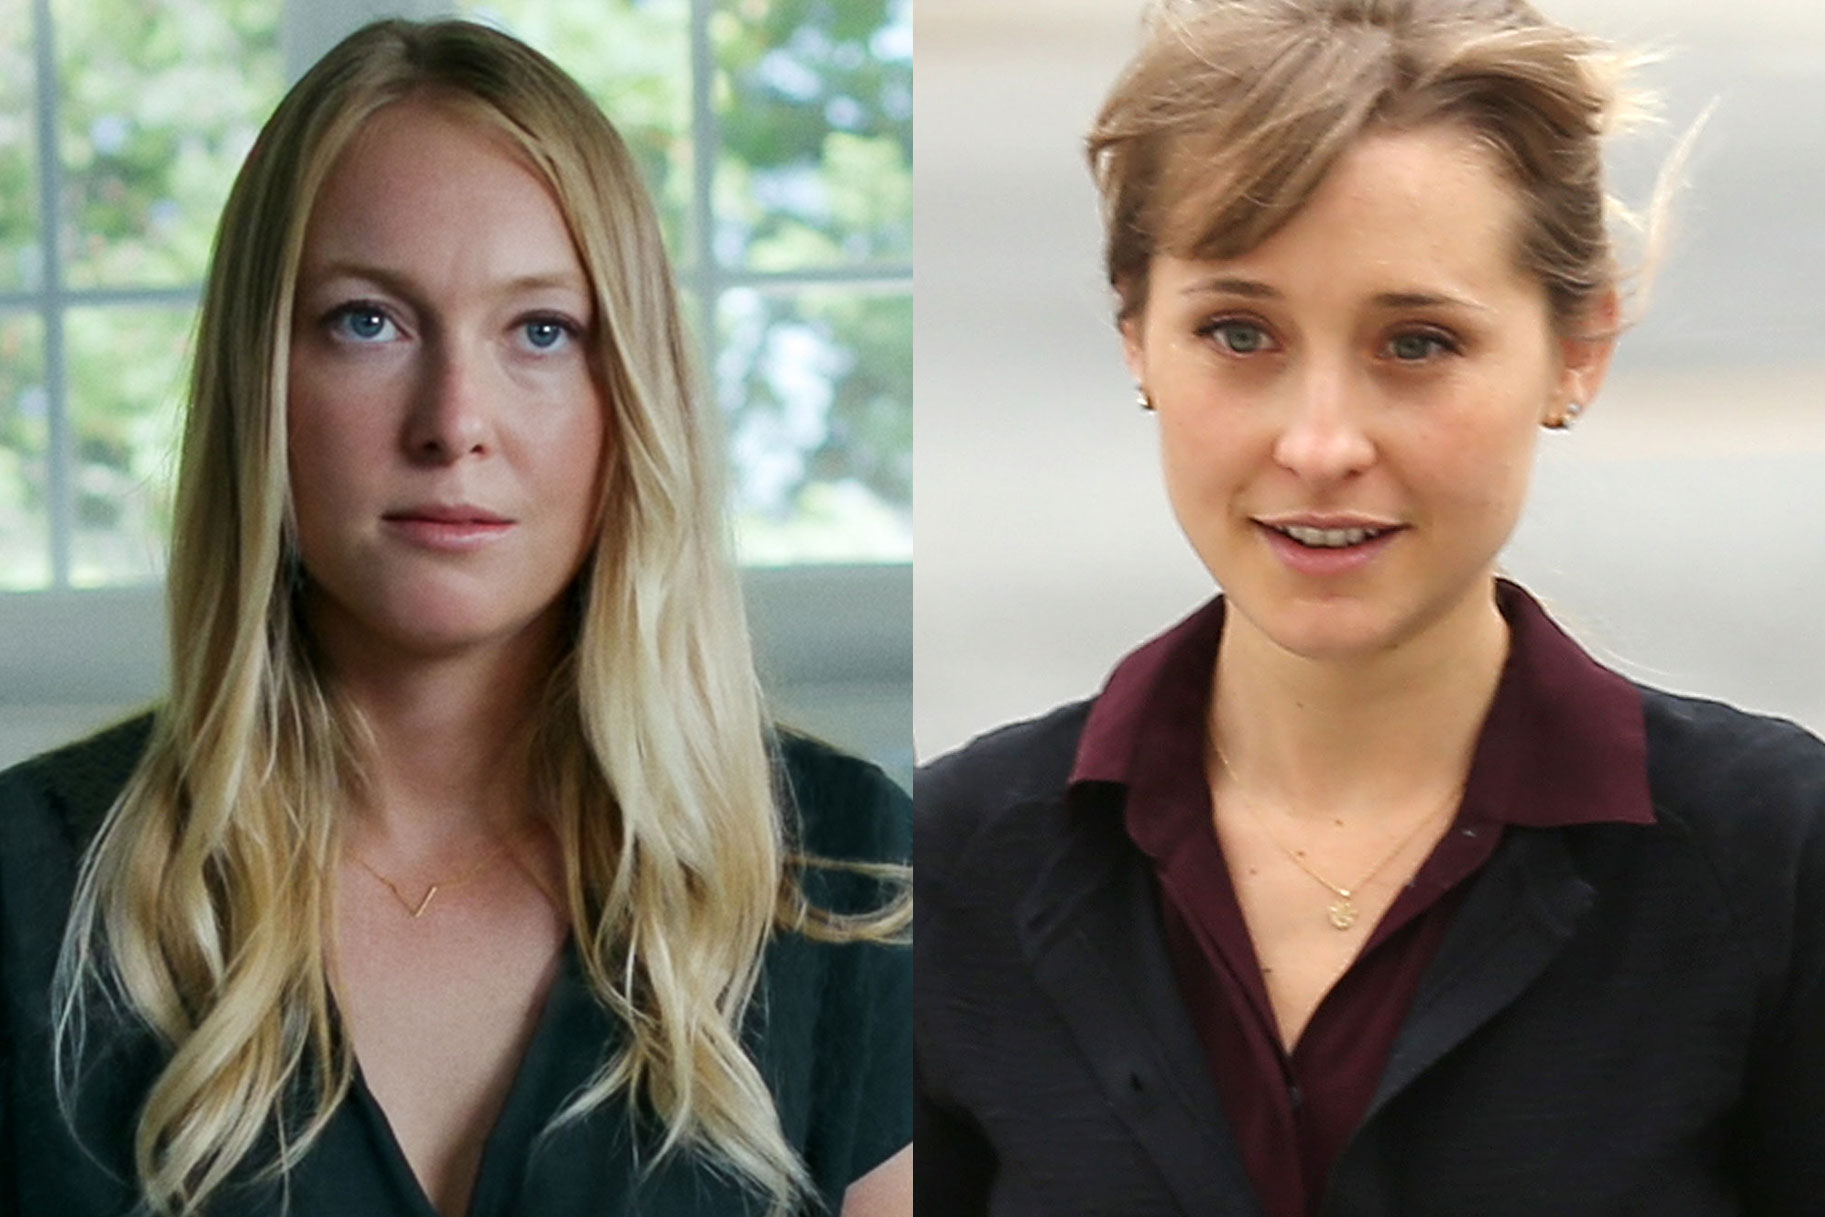 India Oxenberg Feels Betrayed By Former Nxivm Master Allison Mack True Crime Buzz